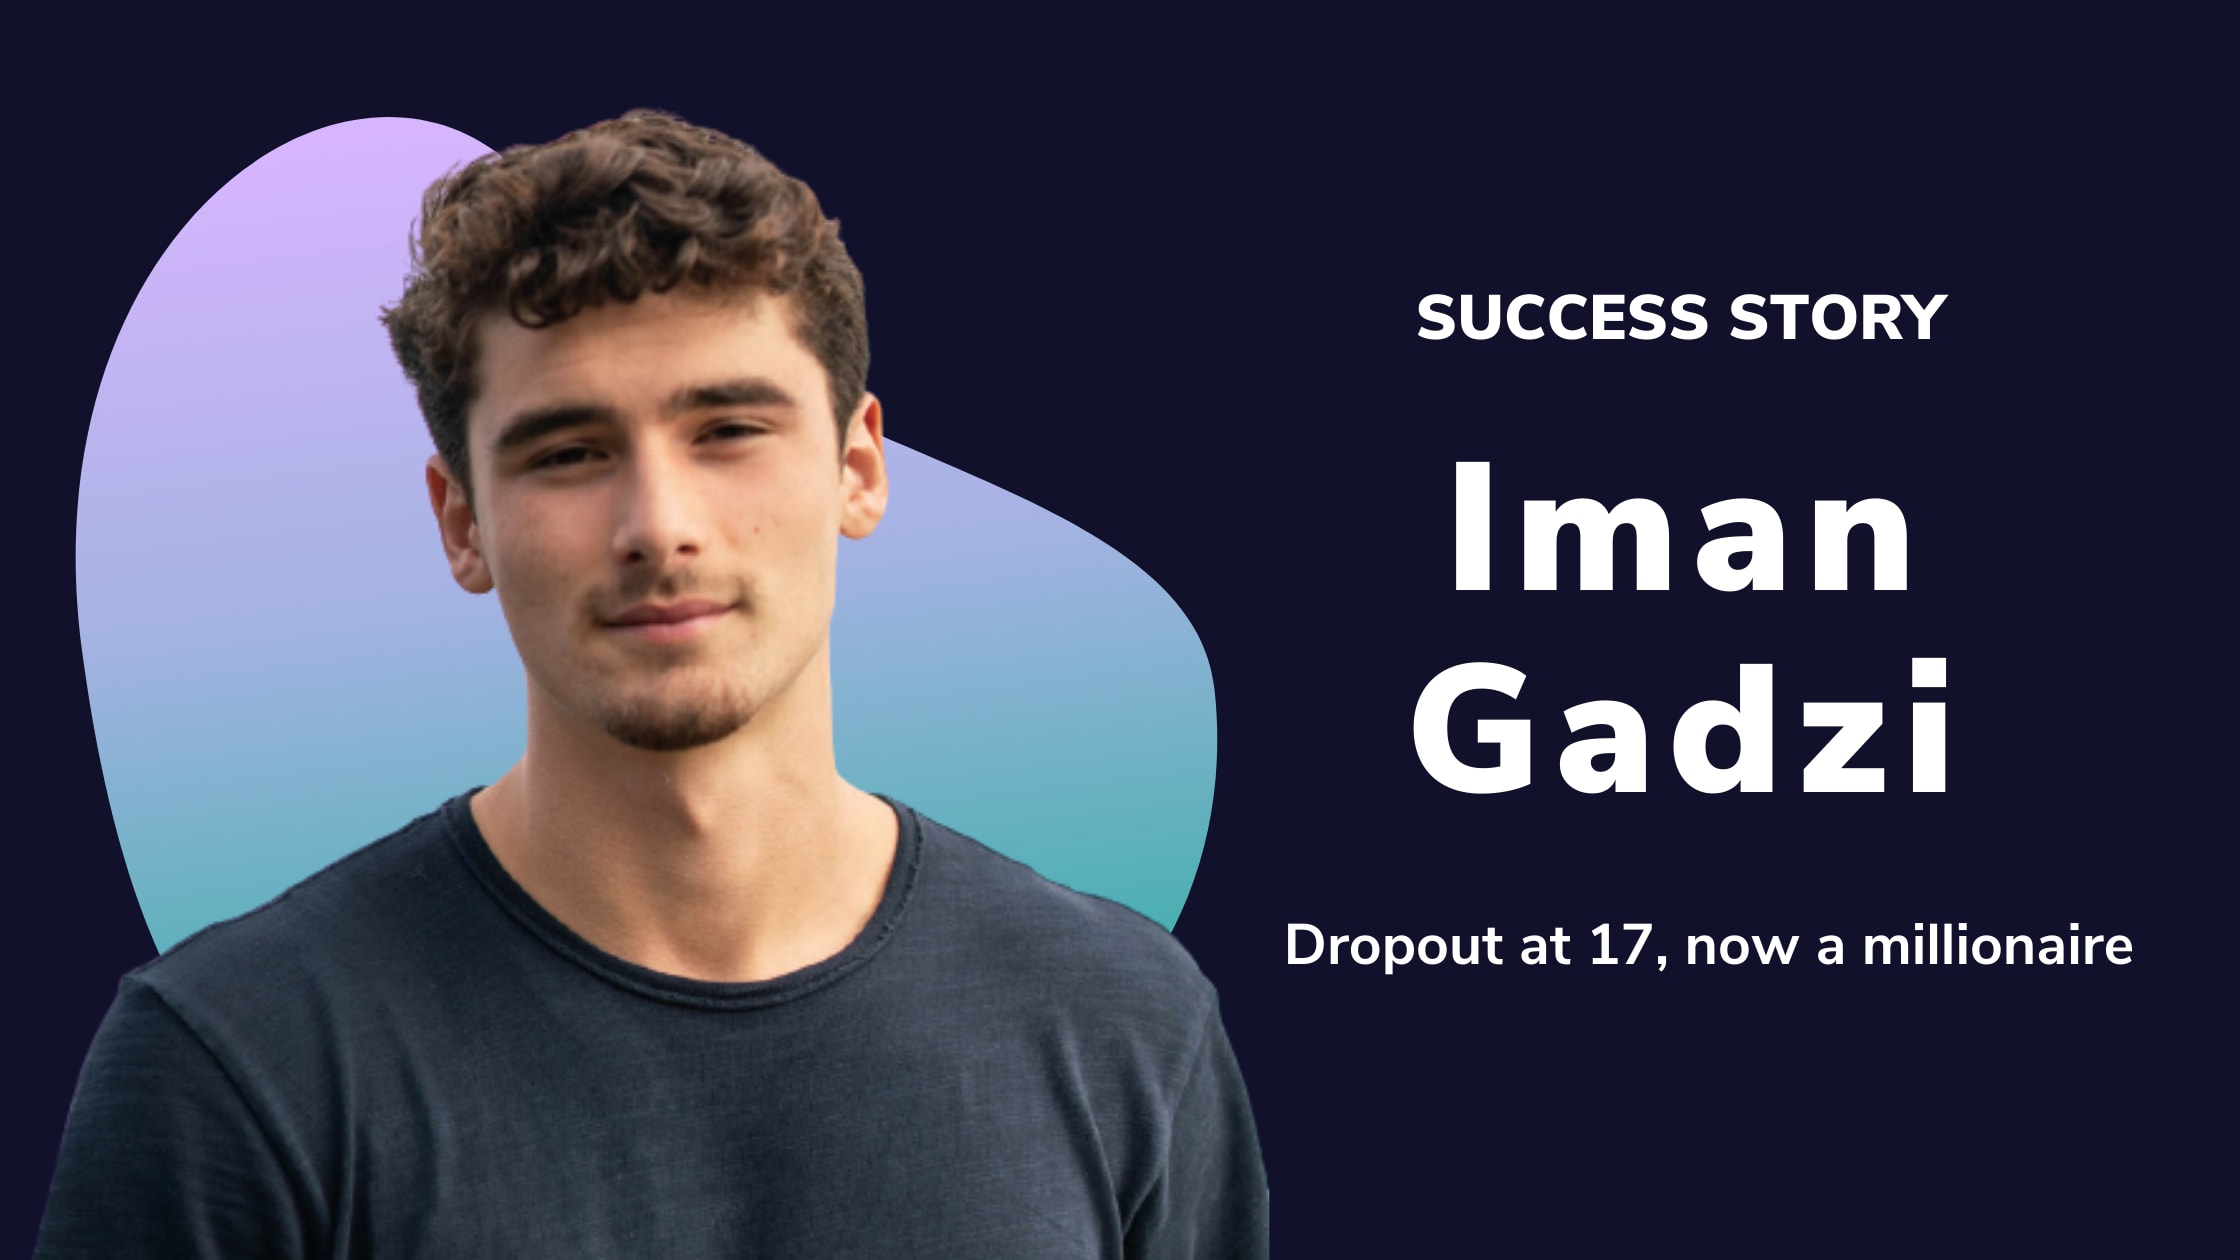 Iman Gadzhi: From High School Dropout to Successful Entrepreneur